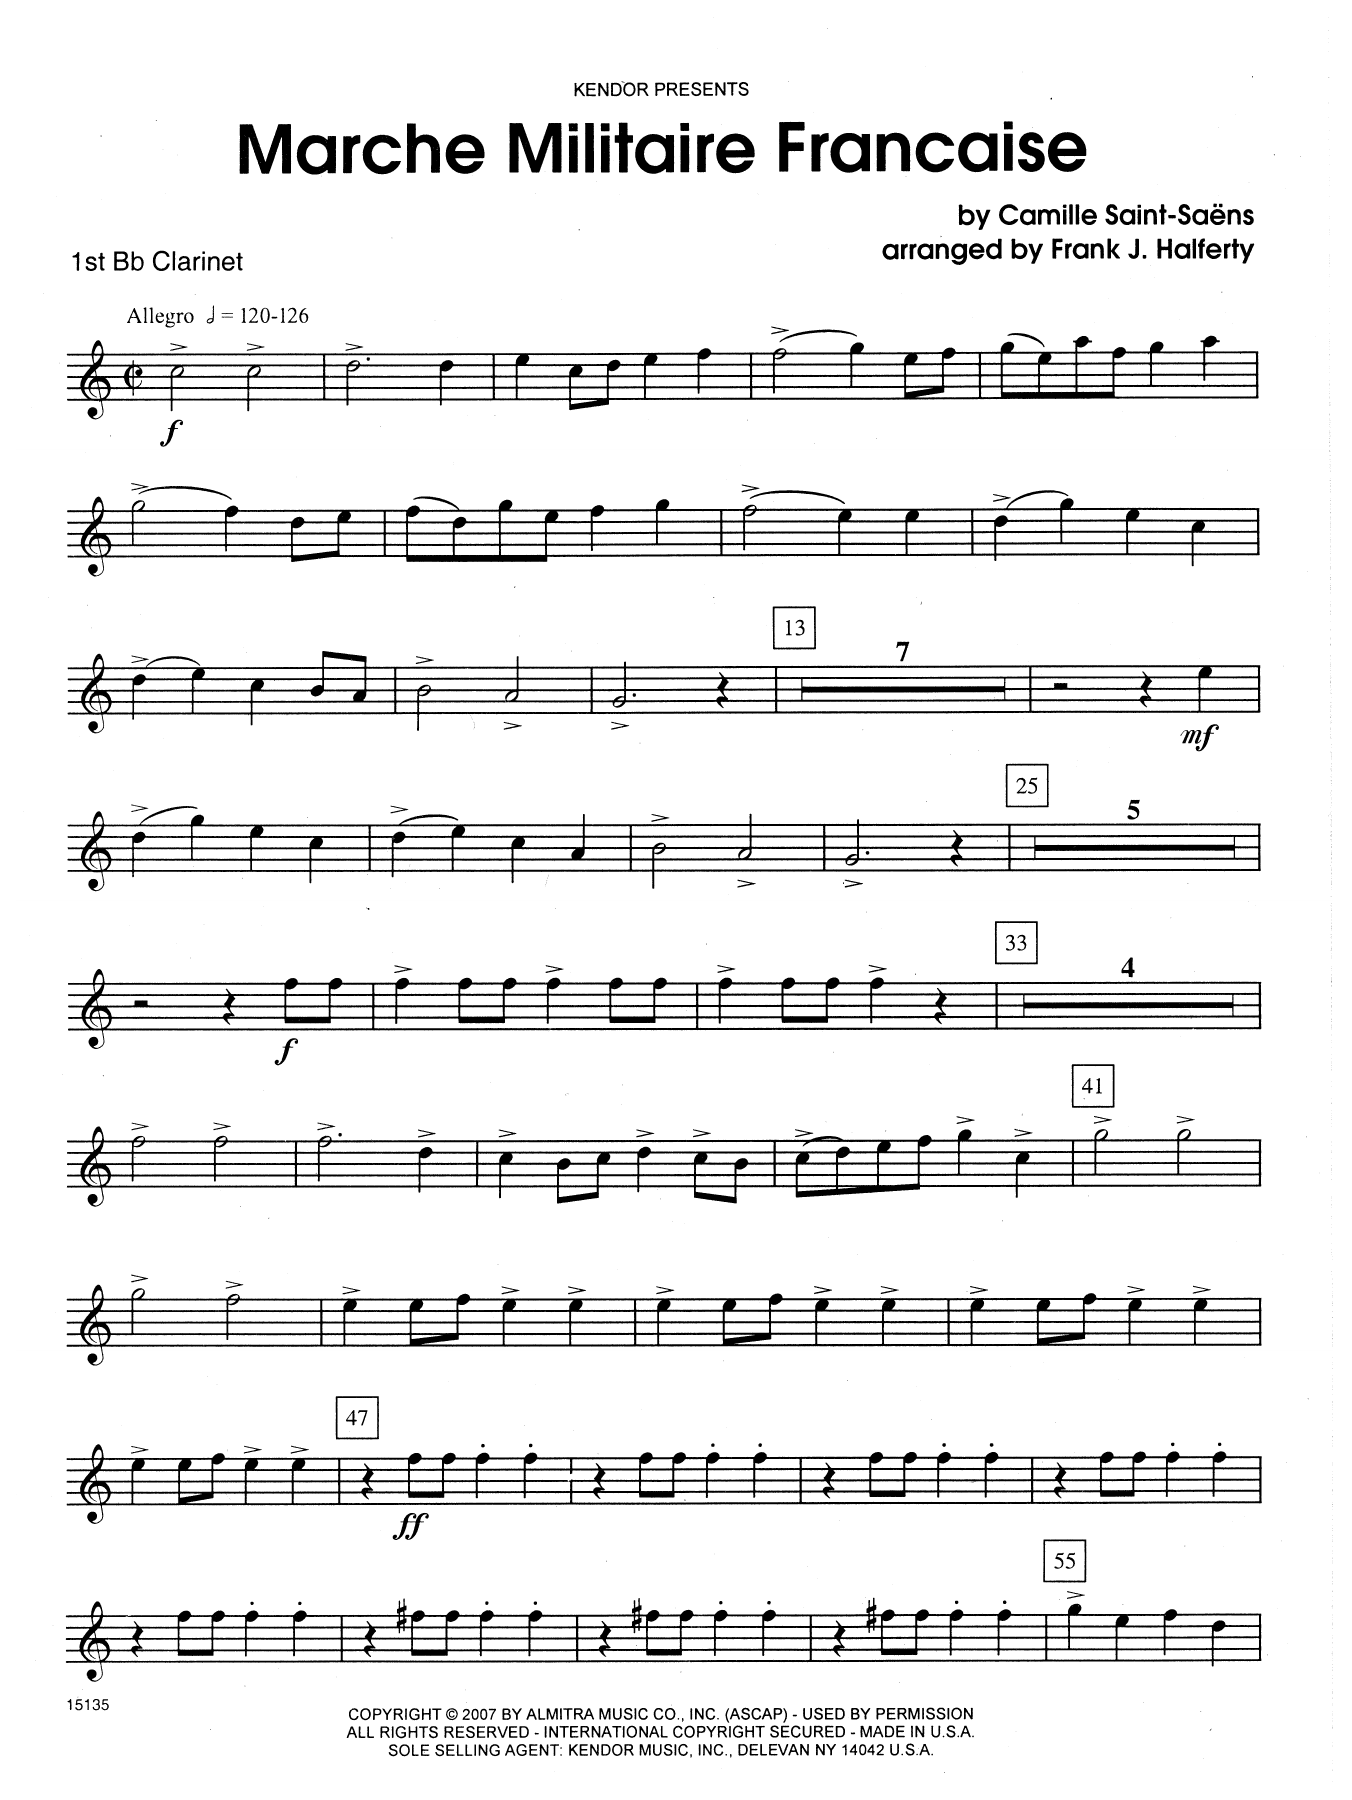 Frank J. Halferty Marche Militaire Francaise - 1st Bb Clarinet sheet music notes and chords. Download Printable PDF.